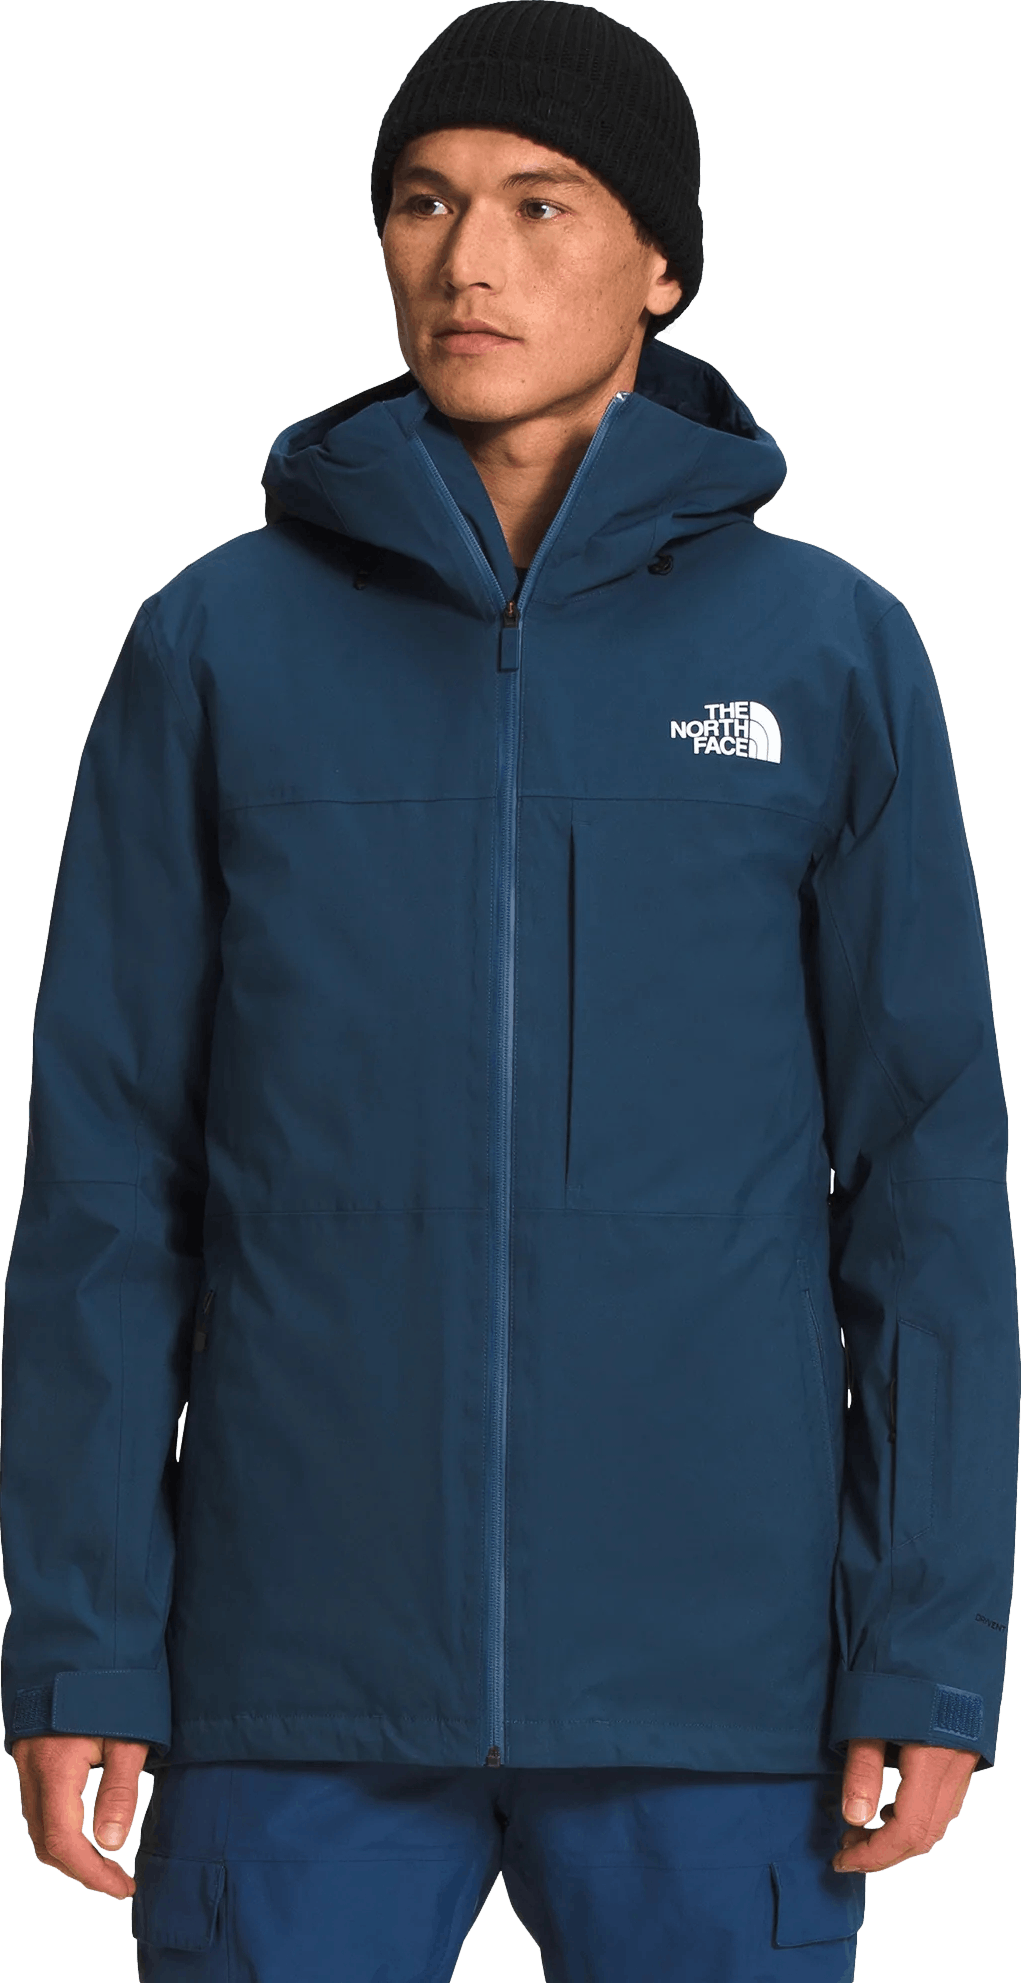 Top 10 The North Face Jackets | Curated.com